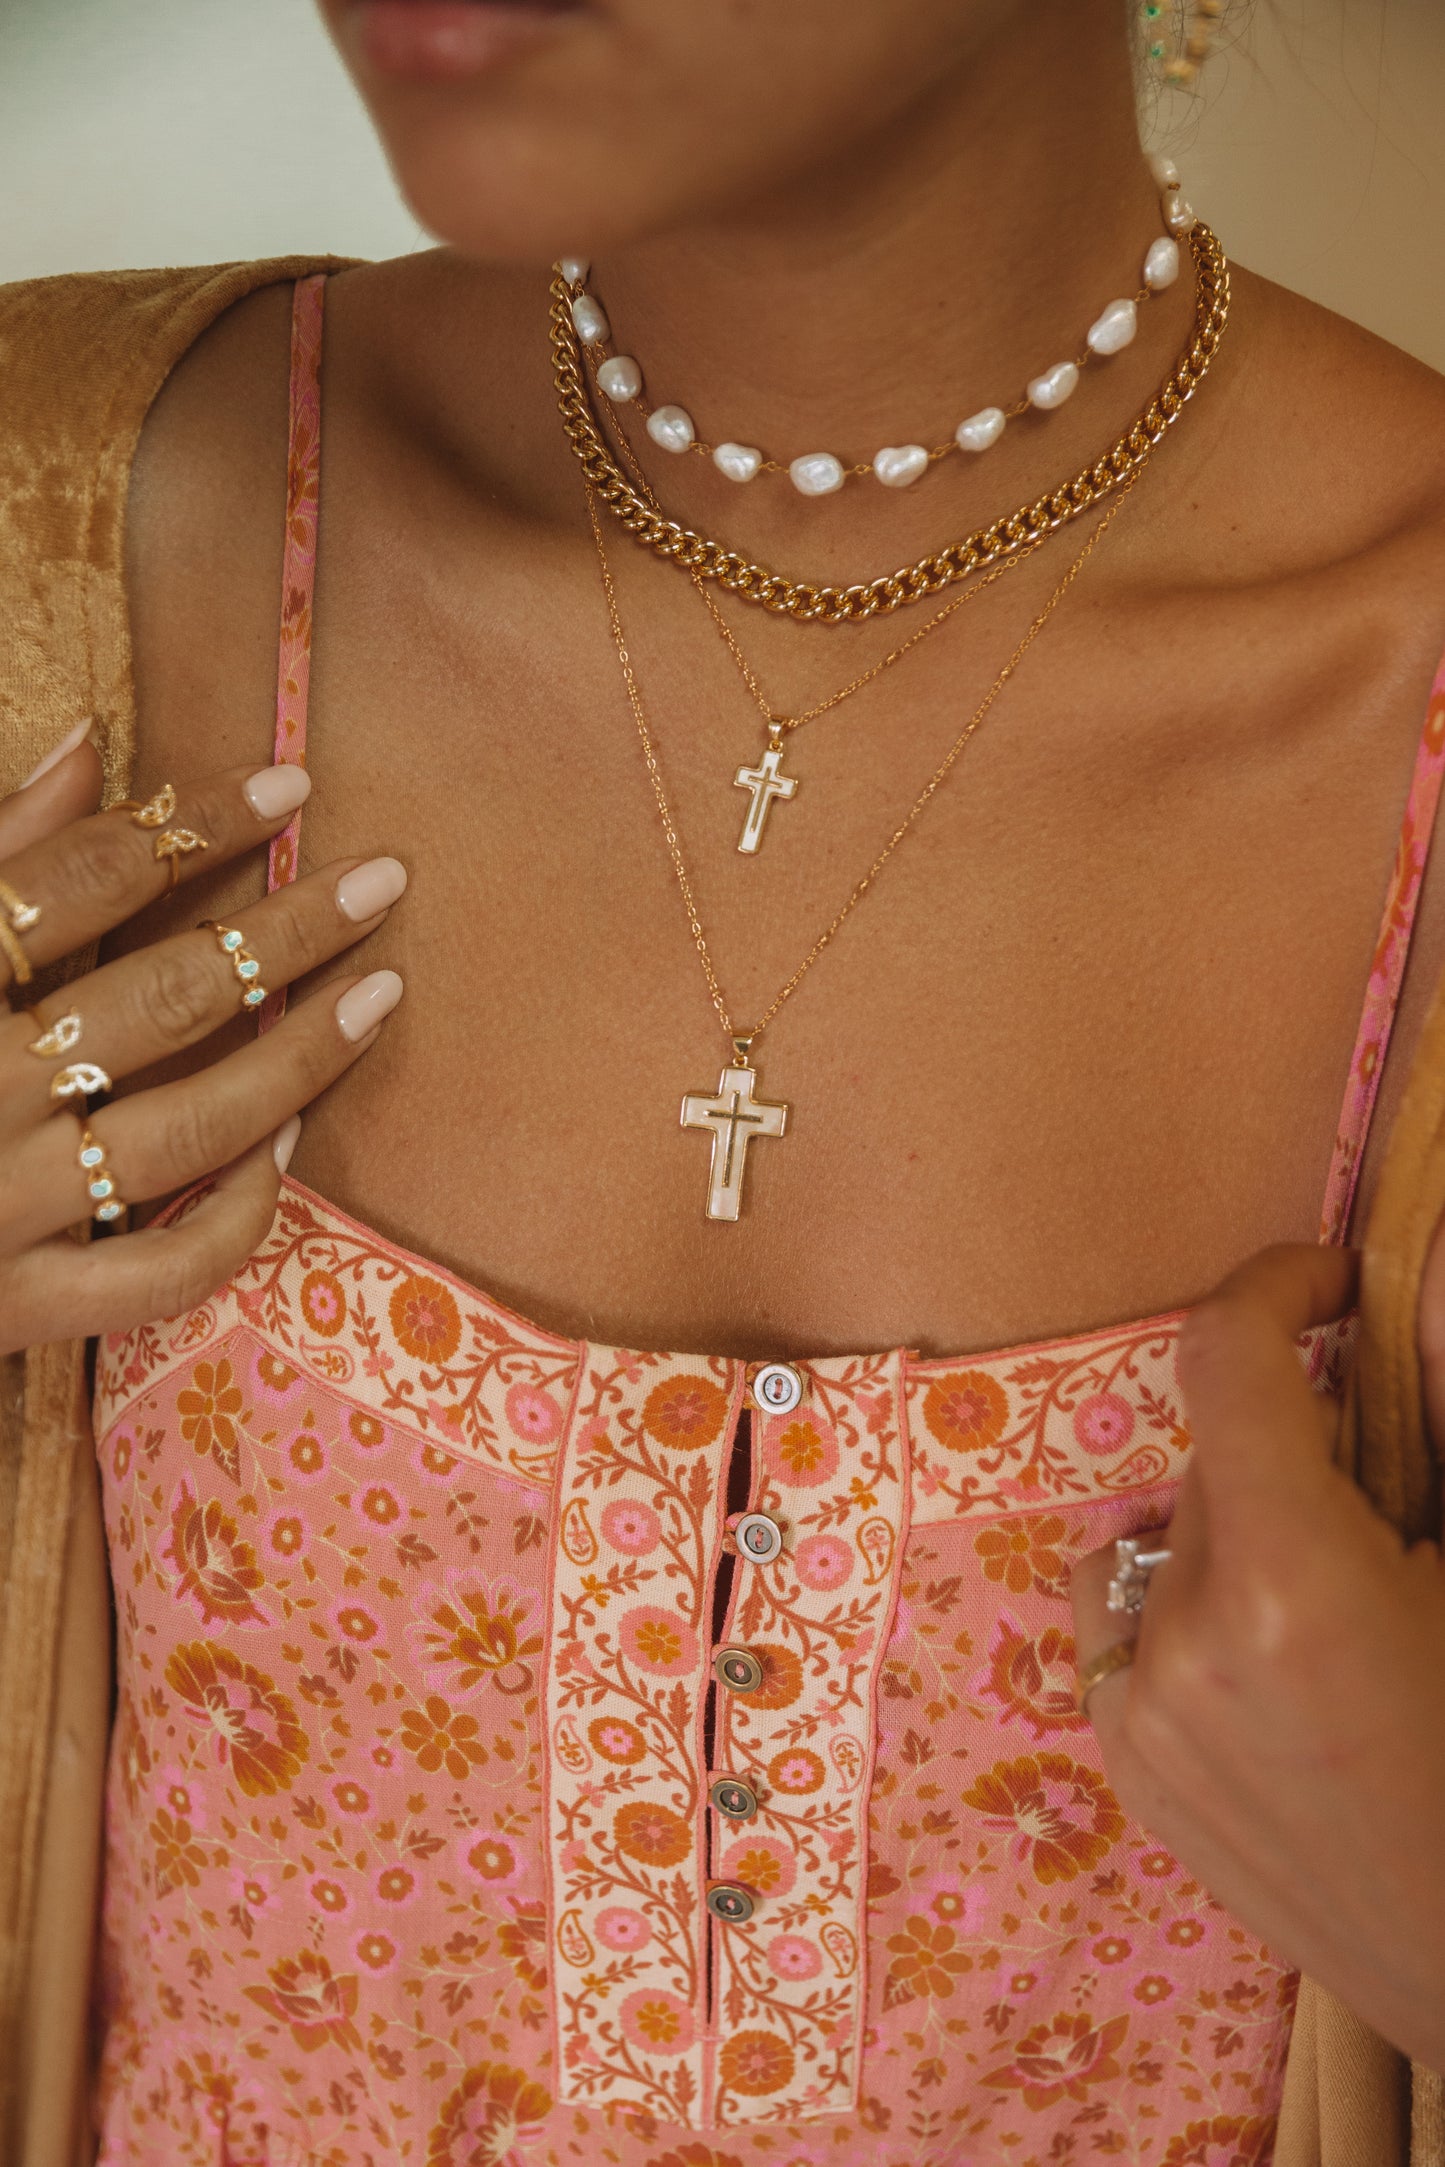 The Pearl Cross Necklace